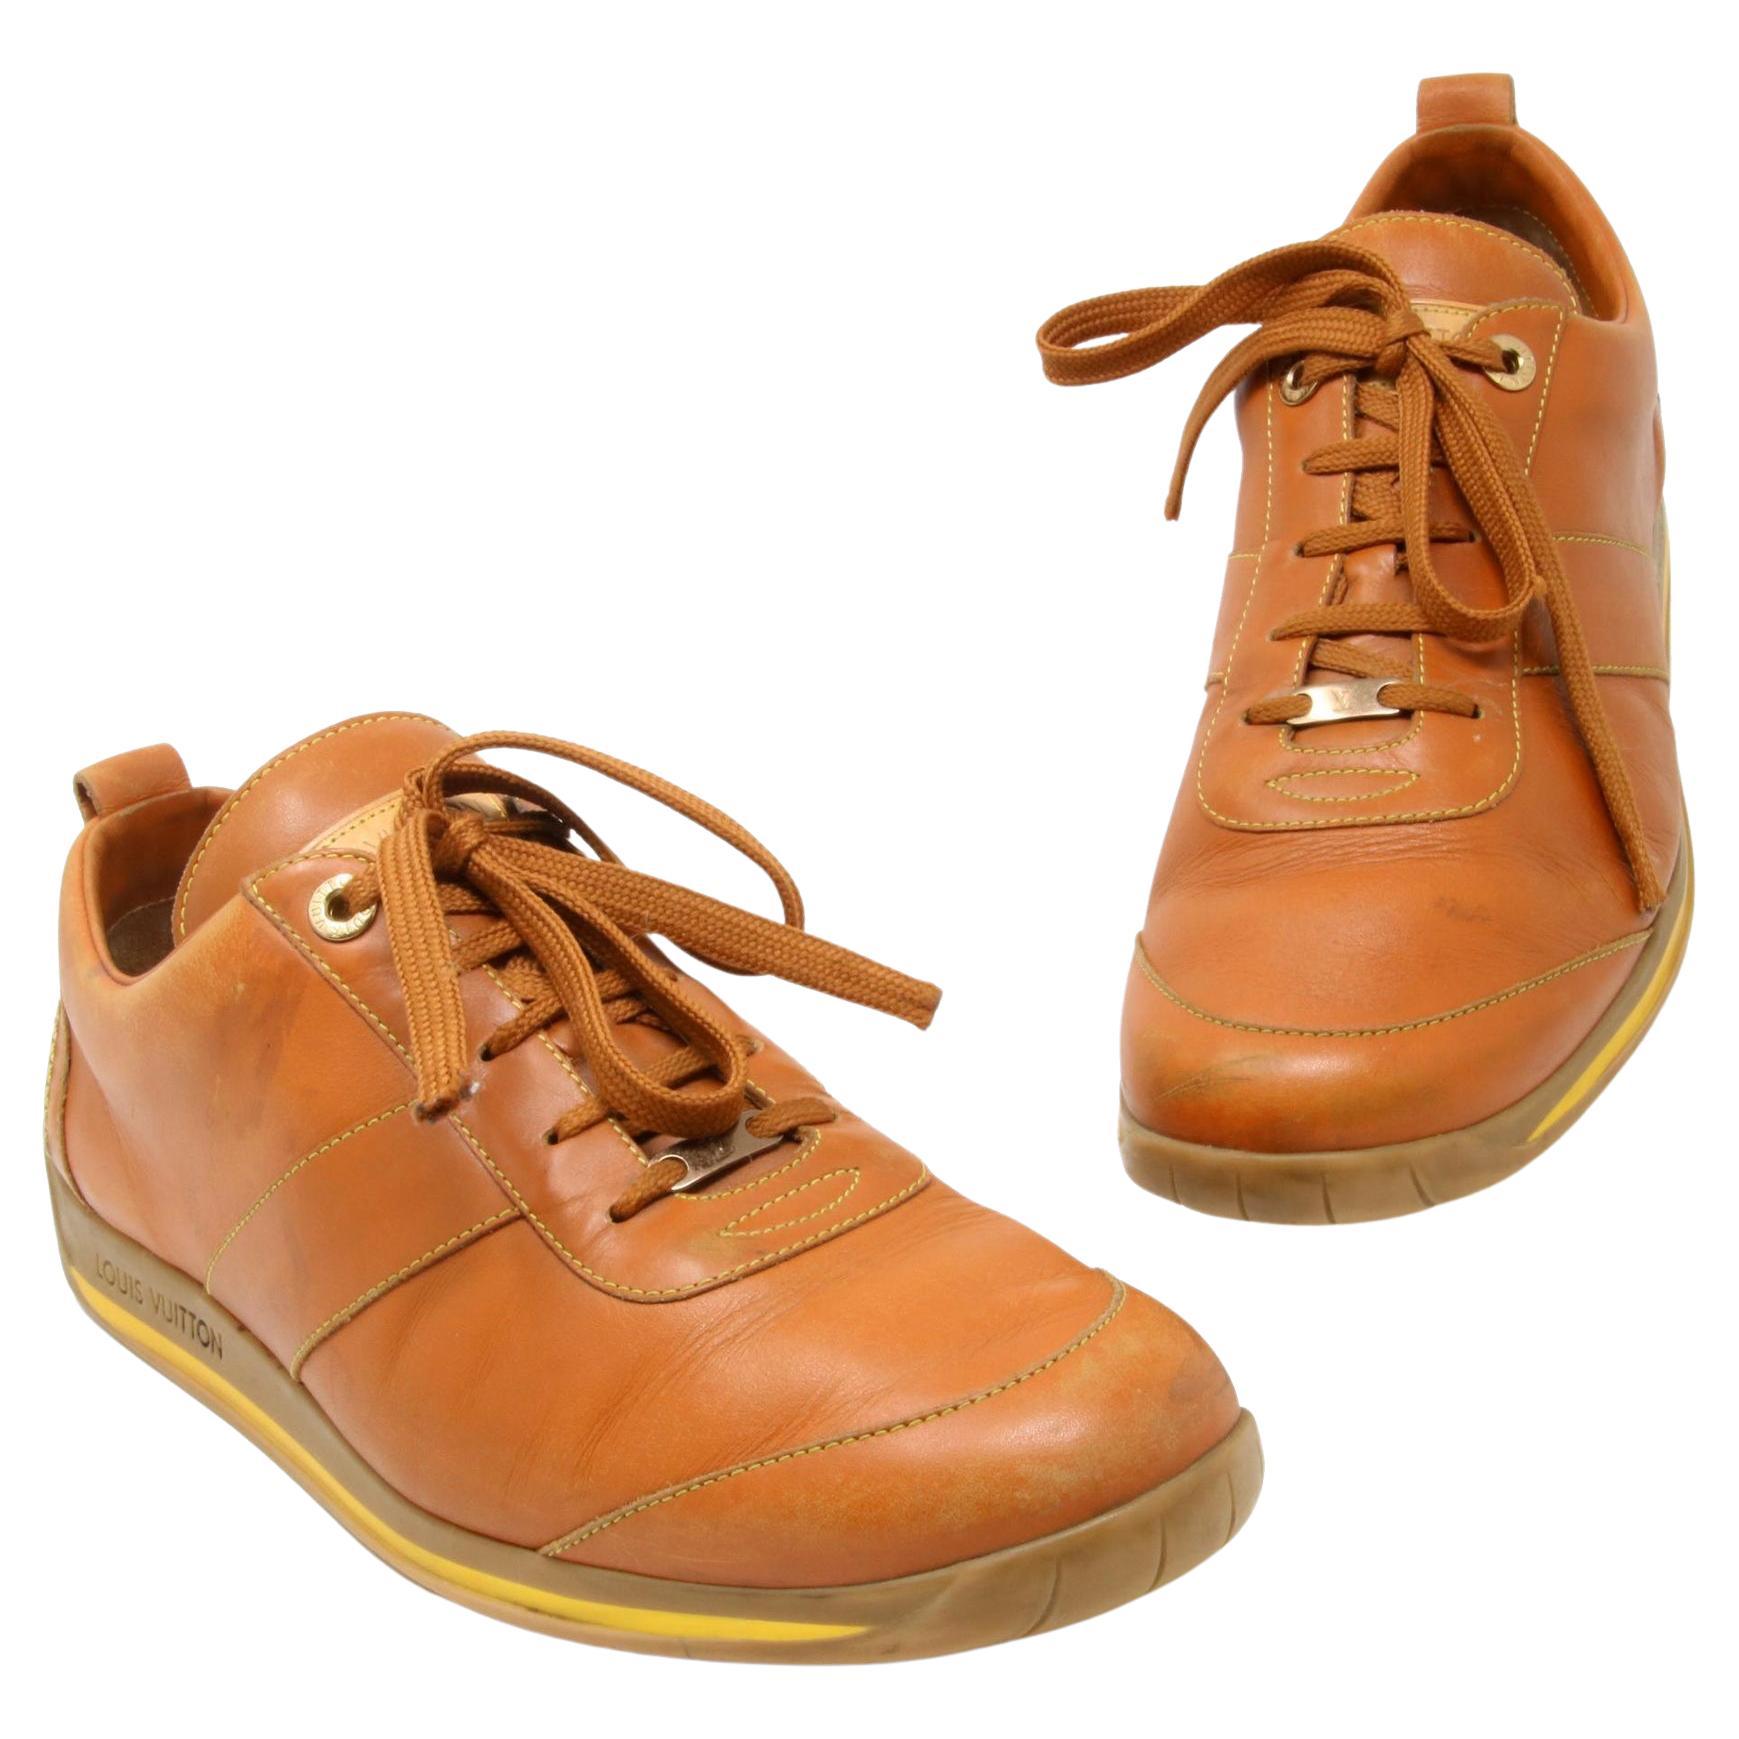 Louis Vuitton Tan Men's Calfskin Leather Leisure Sneaker Shoes LV-S0917P-0163

These stylish men's sneakers are crafted of luxurious calfskin leather in tan brown. These feature a leather matching stripe along each side of shoes. These sneakers